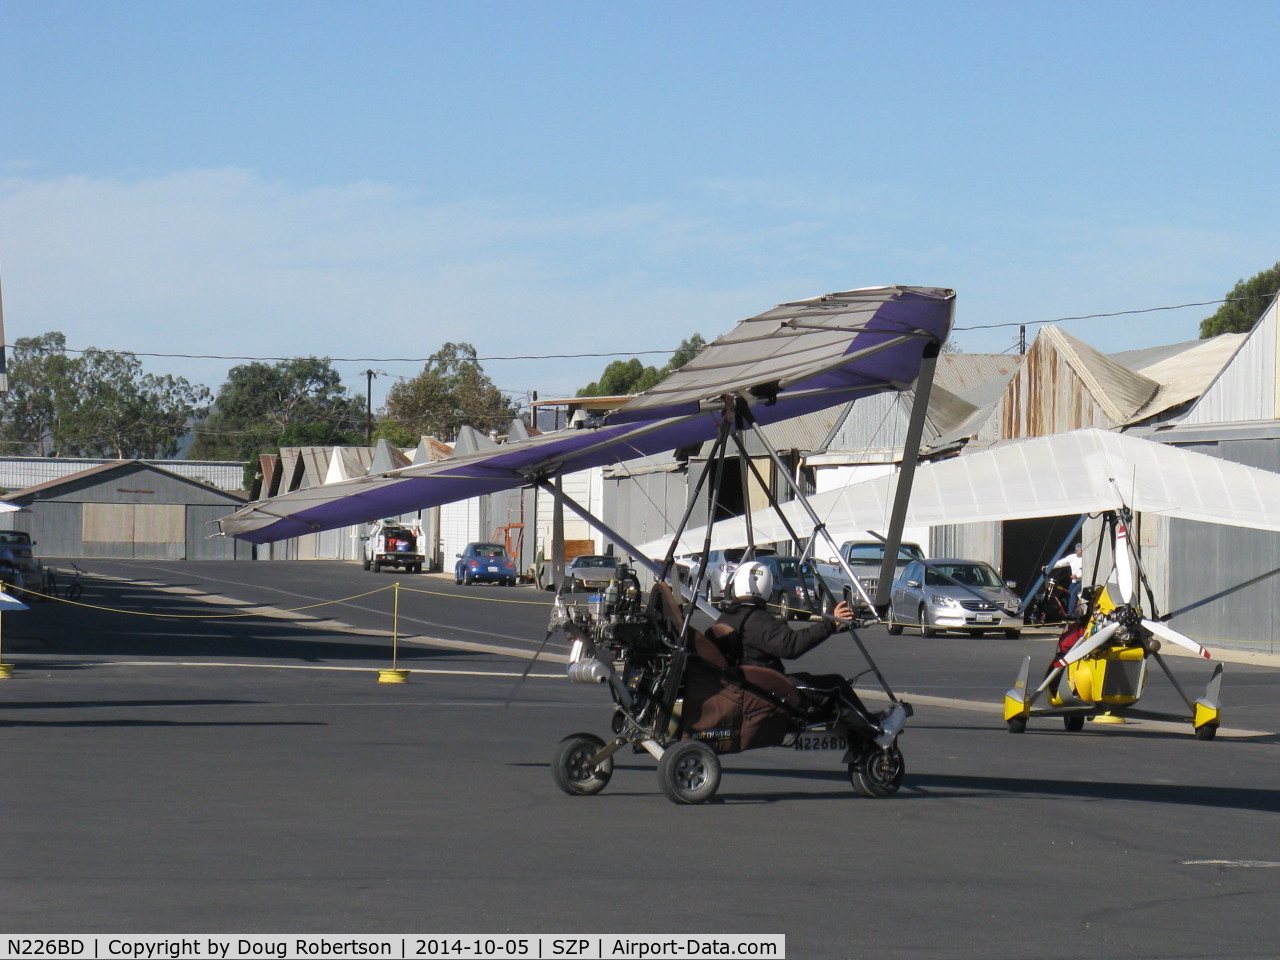 N226BD, North Wing Apache ST C/N 2261107, 2008 North Wing Design APACHE ST weight-shift control ultralight trike, Rotax 582 pusher, taxi after short landing Rwy 22